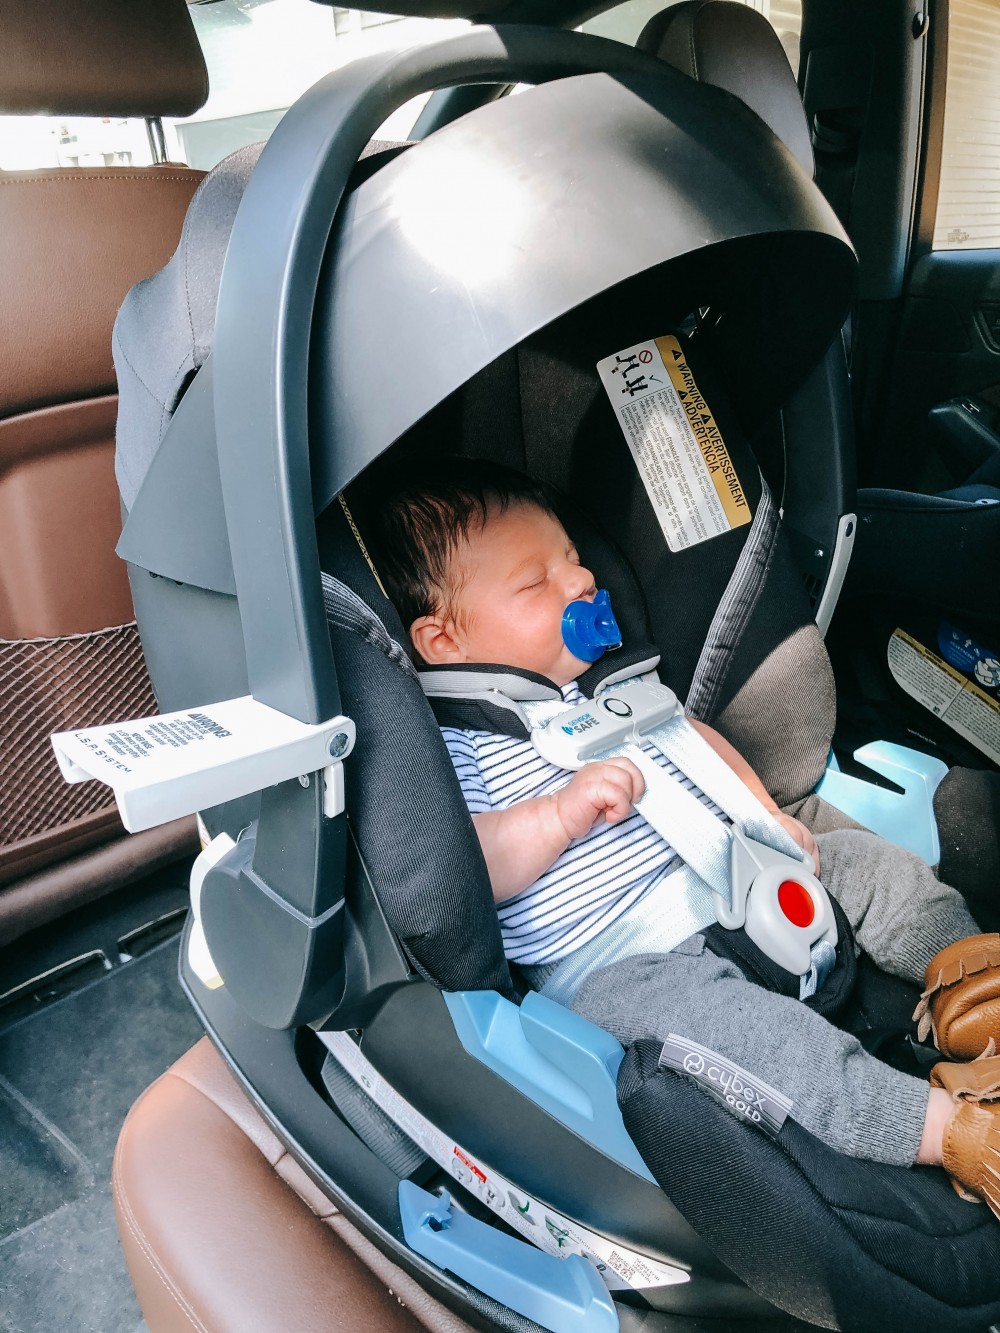 Cybex Aton 2 SensorSafe Car Seat Review. Sharing the safety features of Cooper's infant car seat and reasons why I decided to go with this on. Click on over to the blog post to give it a read.